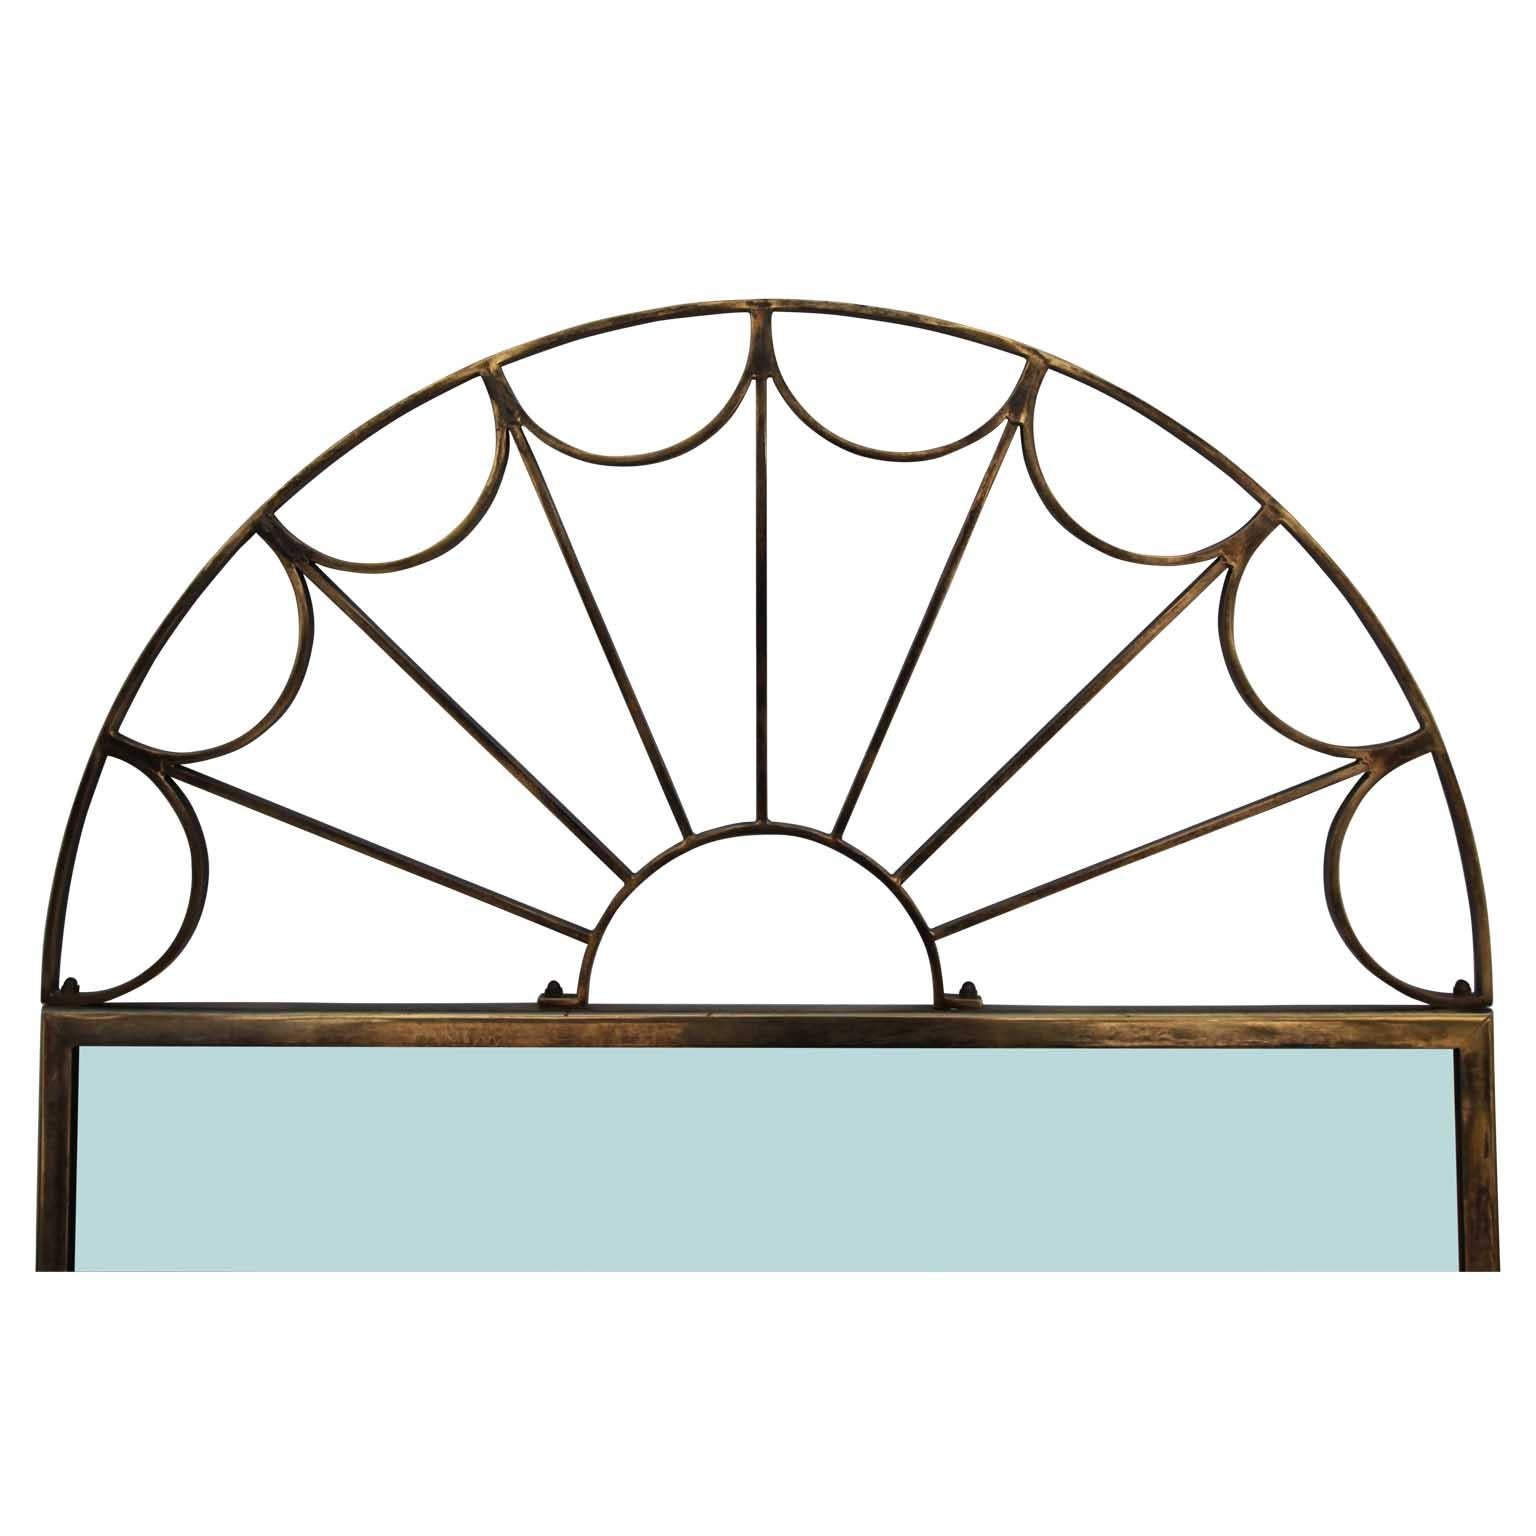 Modern Hollywood Regency rectangular mirror with a radiating golden brass arch attached to the top.